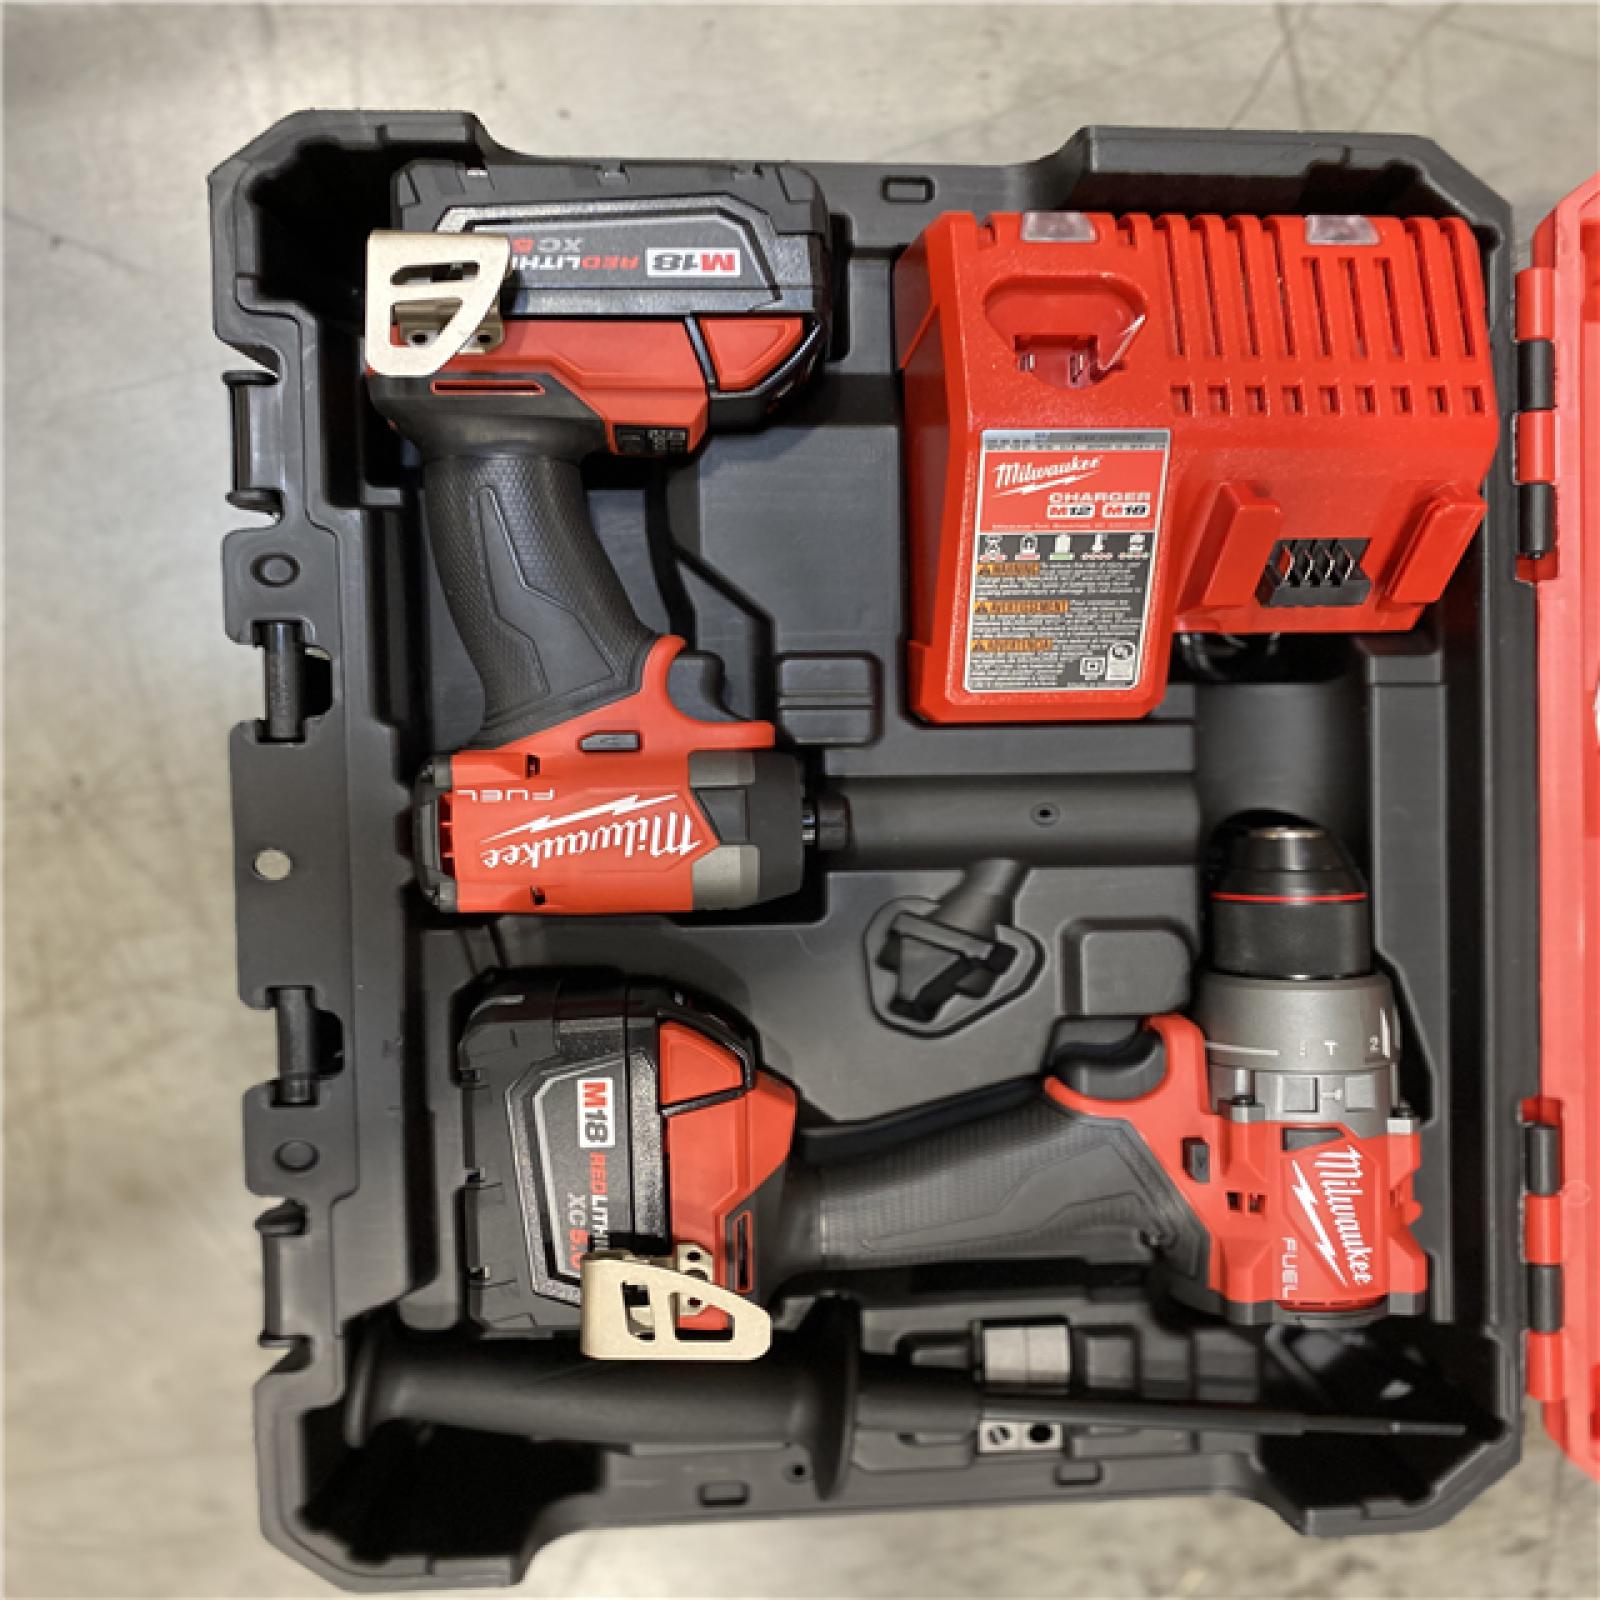 NEW! Milwaukee M18 FUEL 18V Lithium-Ion Brushless Cordless Hammer Drill and Impact Driver Combo Kit (2-Tool) with 2 Batteries